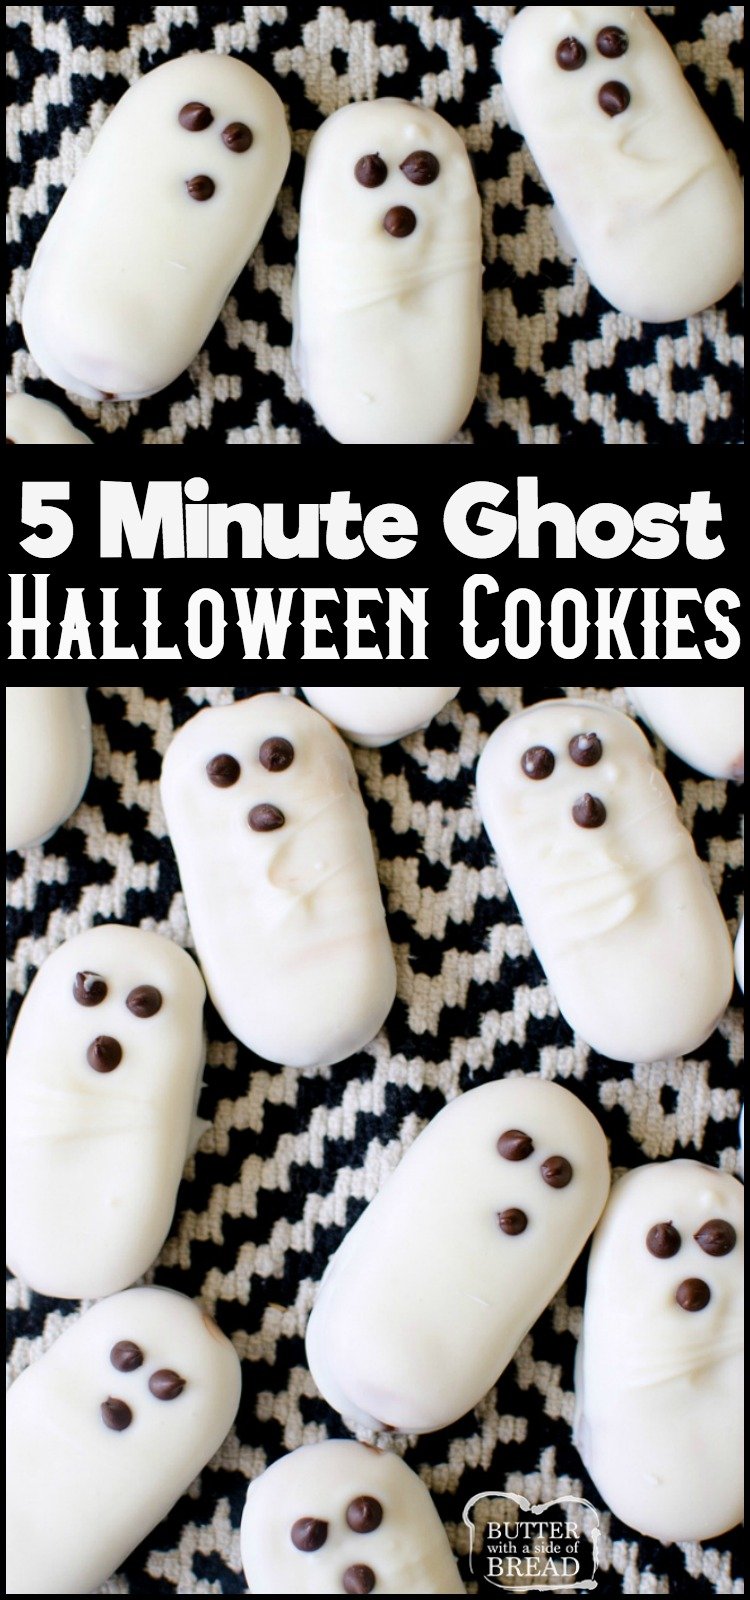 3 Ingredient Easy Ghost Halloween Cookies are a cute and festive treat! Made in minutes & devoured in seconds, these easy Halloween cookies are a hit! Simple, 5 minute recipe with only 3 ingredients! #halloween #ghosts #cookies #recipe #party #food from BUTTER WITH A SIDE OF BREAD